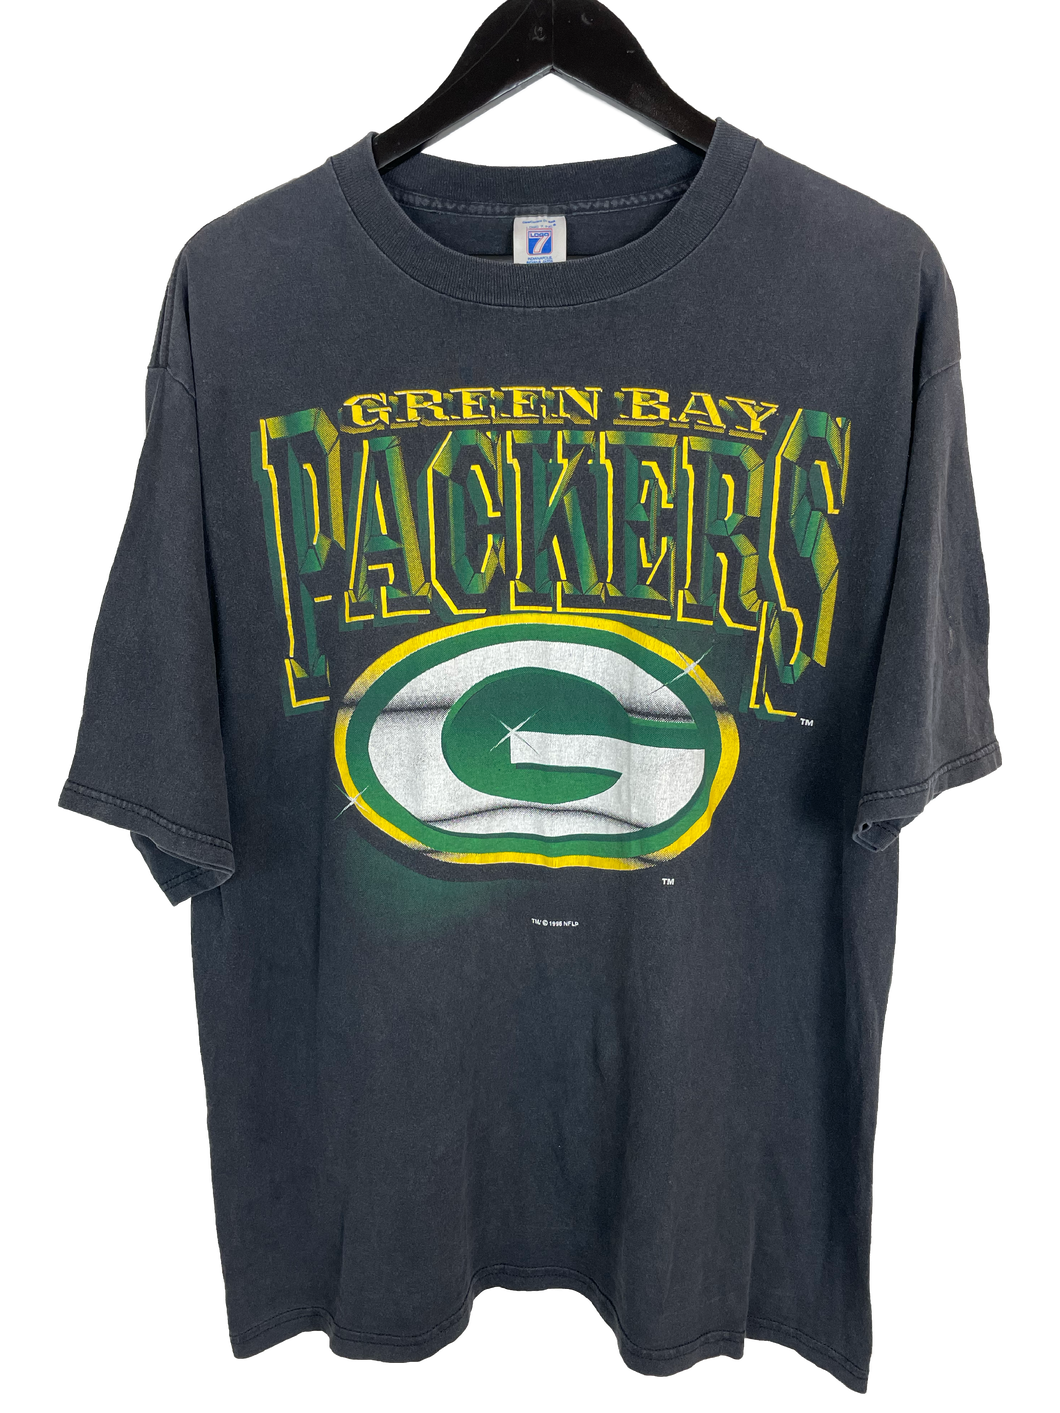 1996 GREEN BAY PACKERS TEE - XL